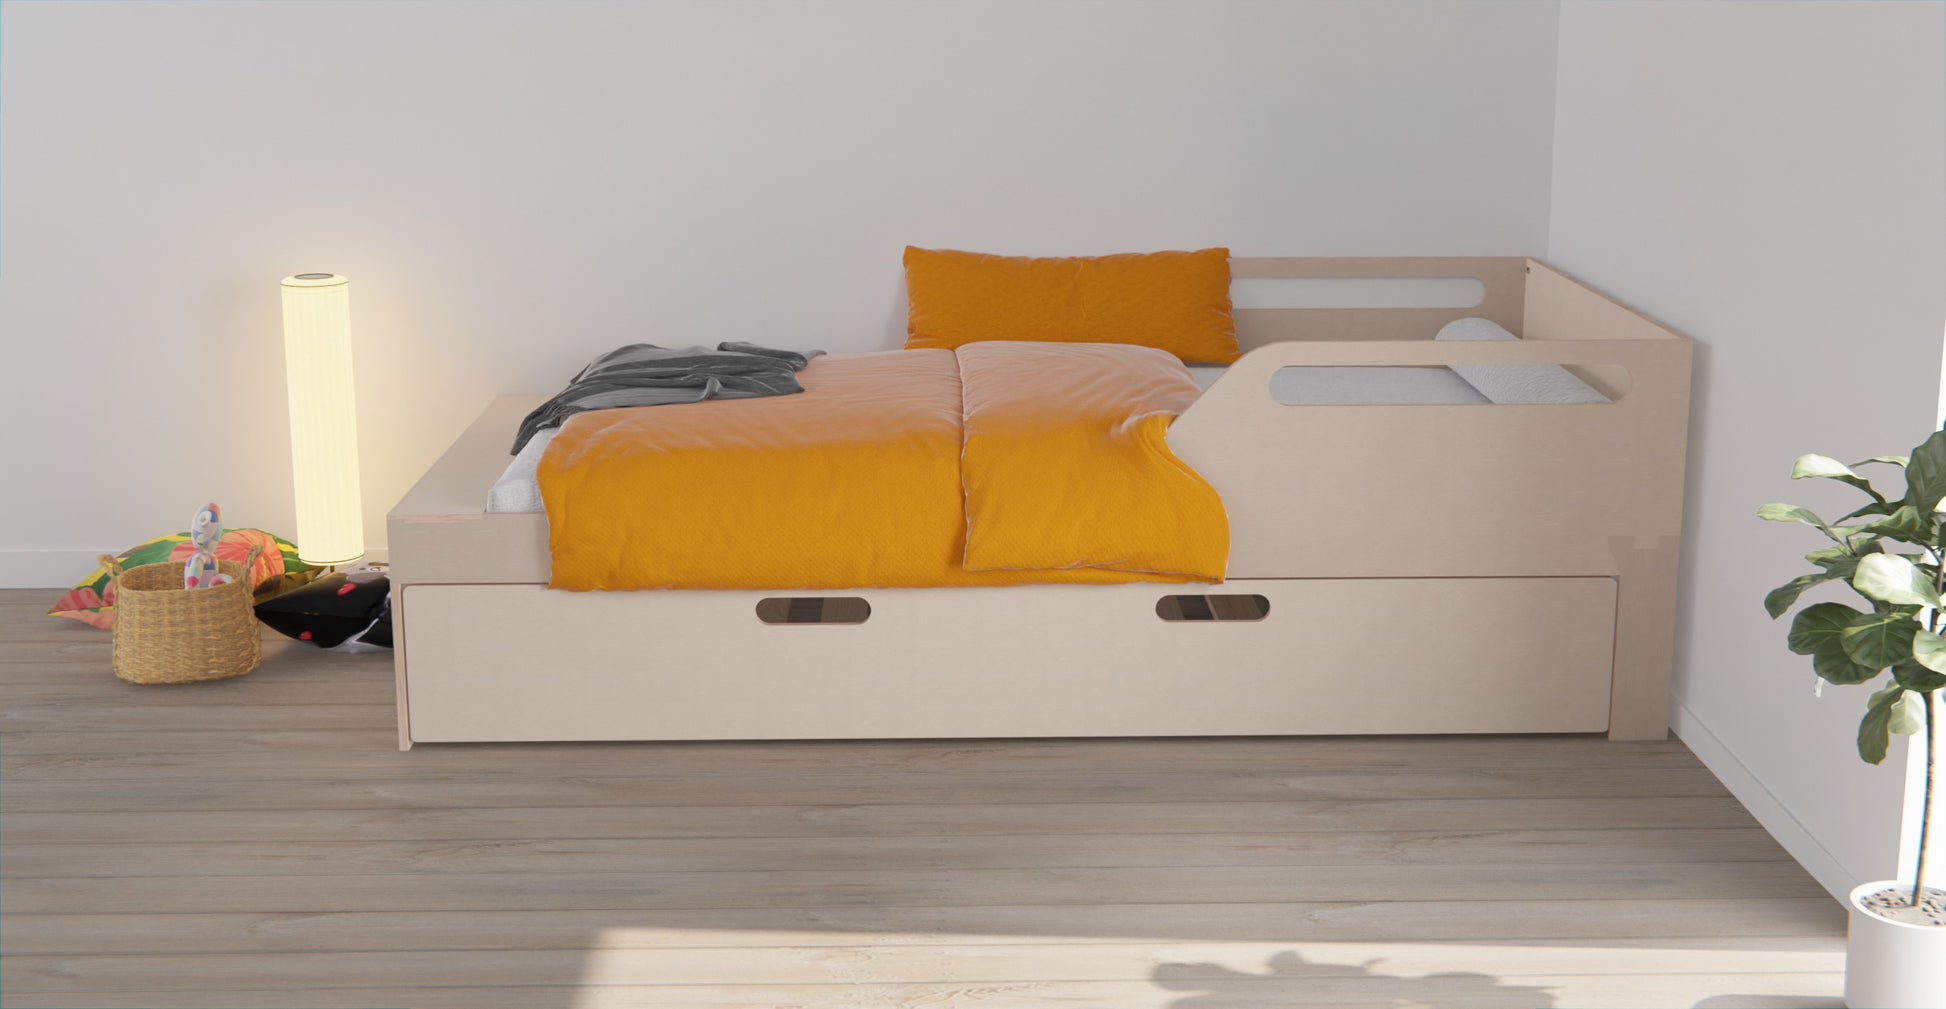 Sleek design meets practicality - wooden bed frame with trundle bed and built-in shelf. Organise your bedroom in style.